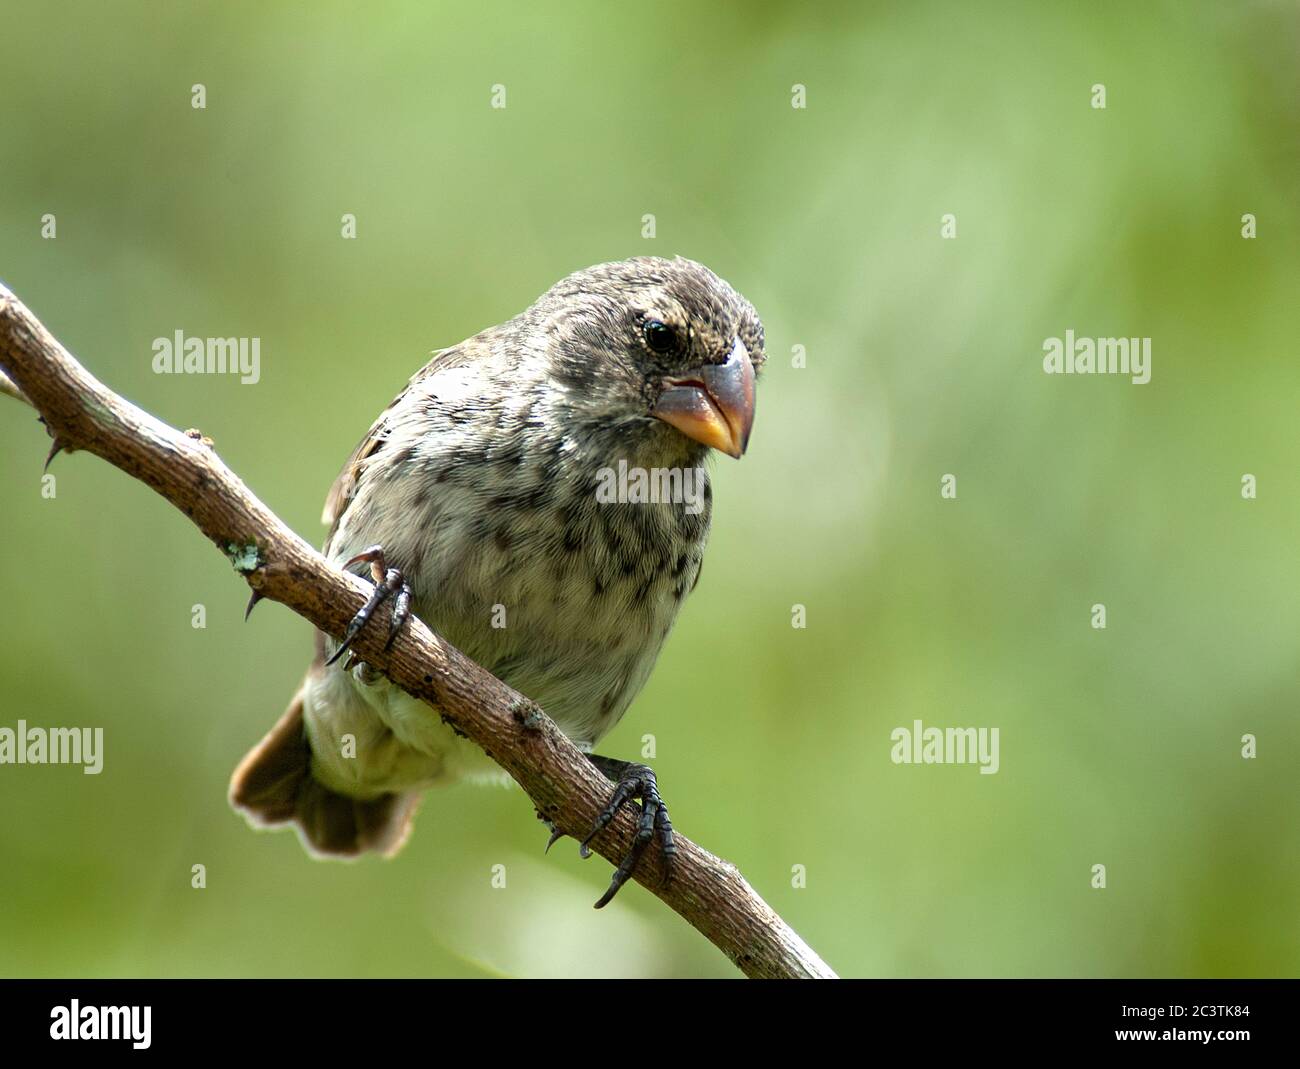 medium ground finch (Geospiza fortis), female perched on a branch, Ecuador, Galapagos Islands Stock Photo